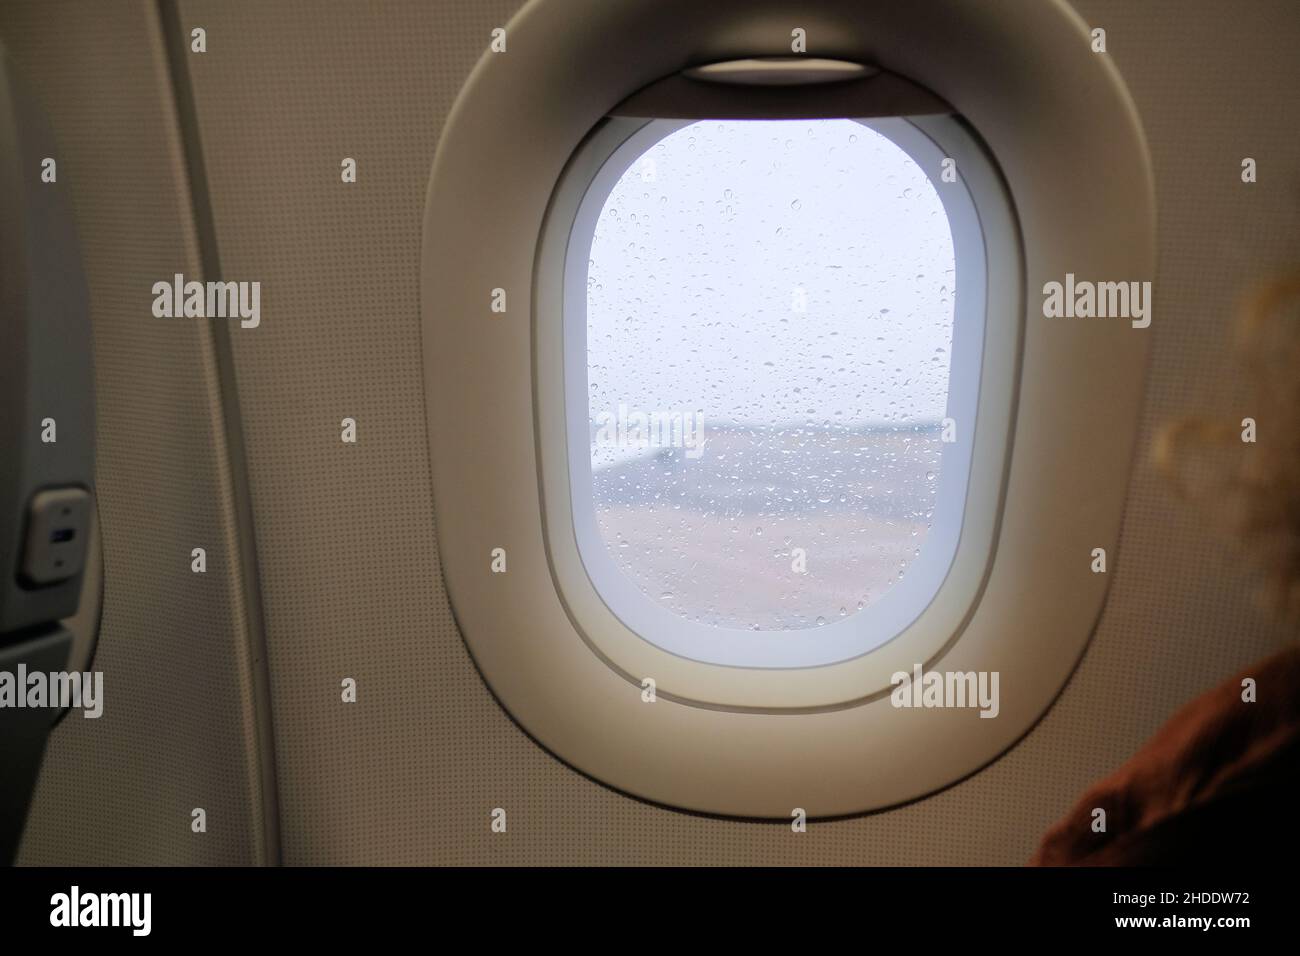 Airplane window during a storm with rain drops on window pane; selective focus on raindrops with blurry tarmac, wing, and gray exterior. Stock Photo